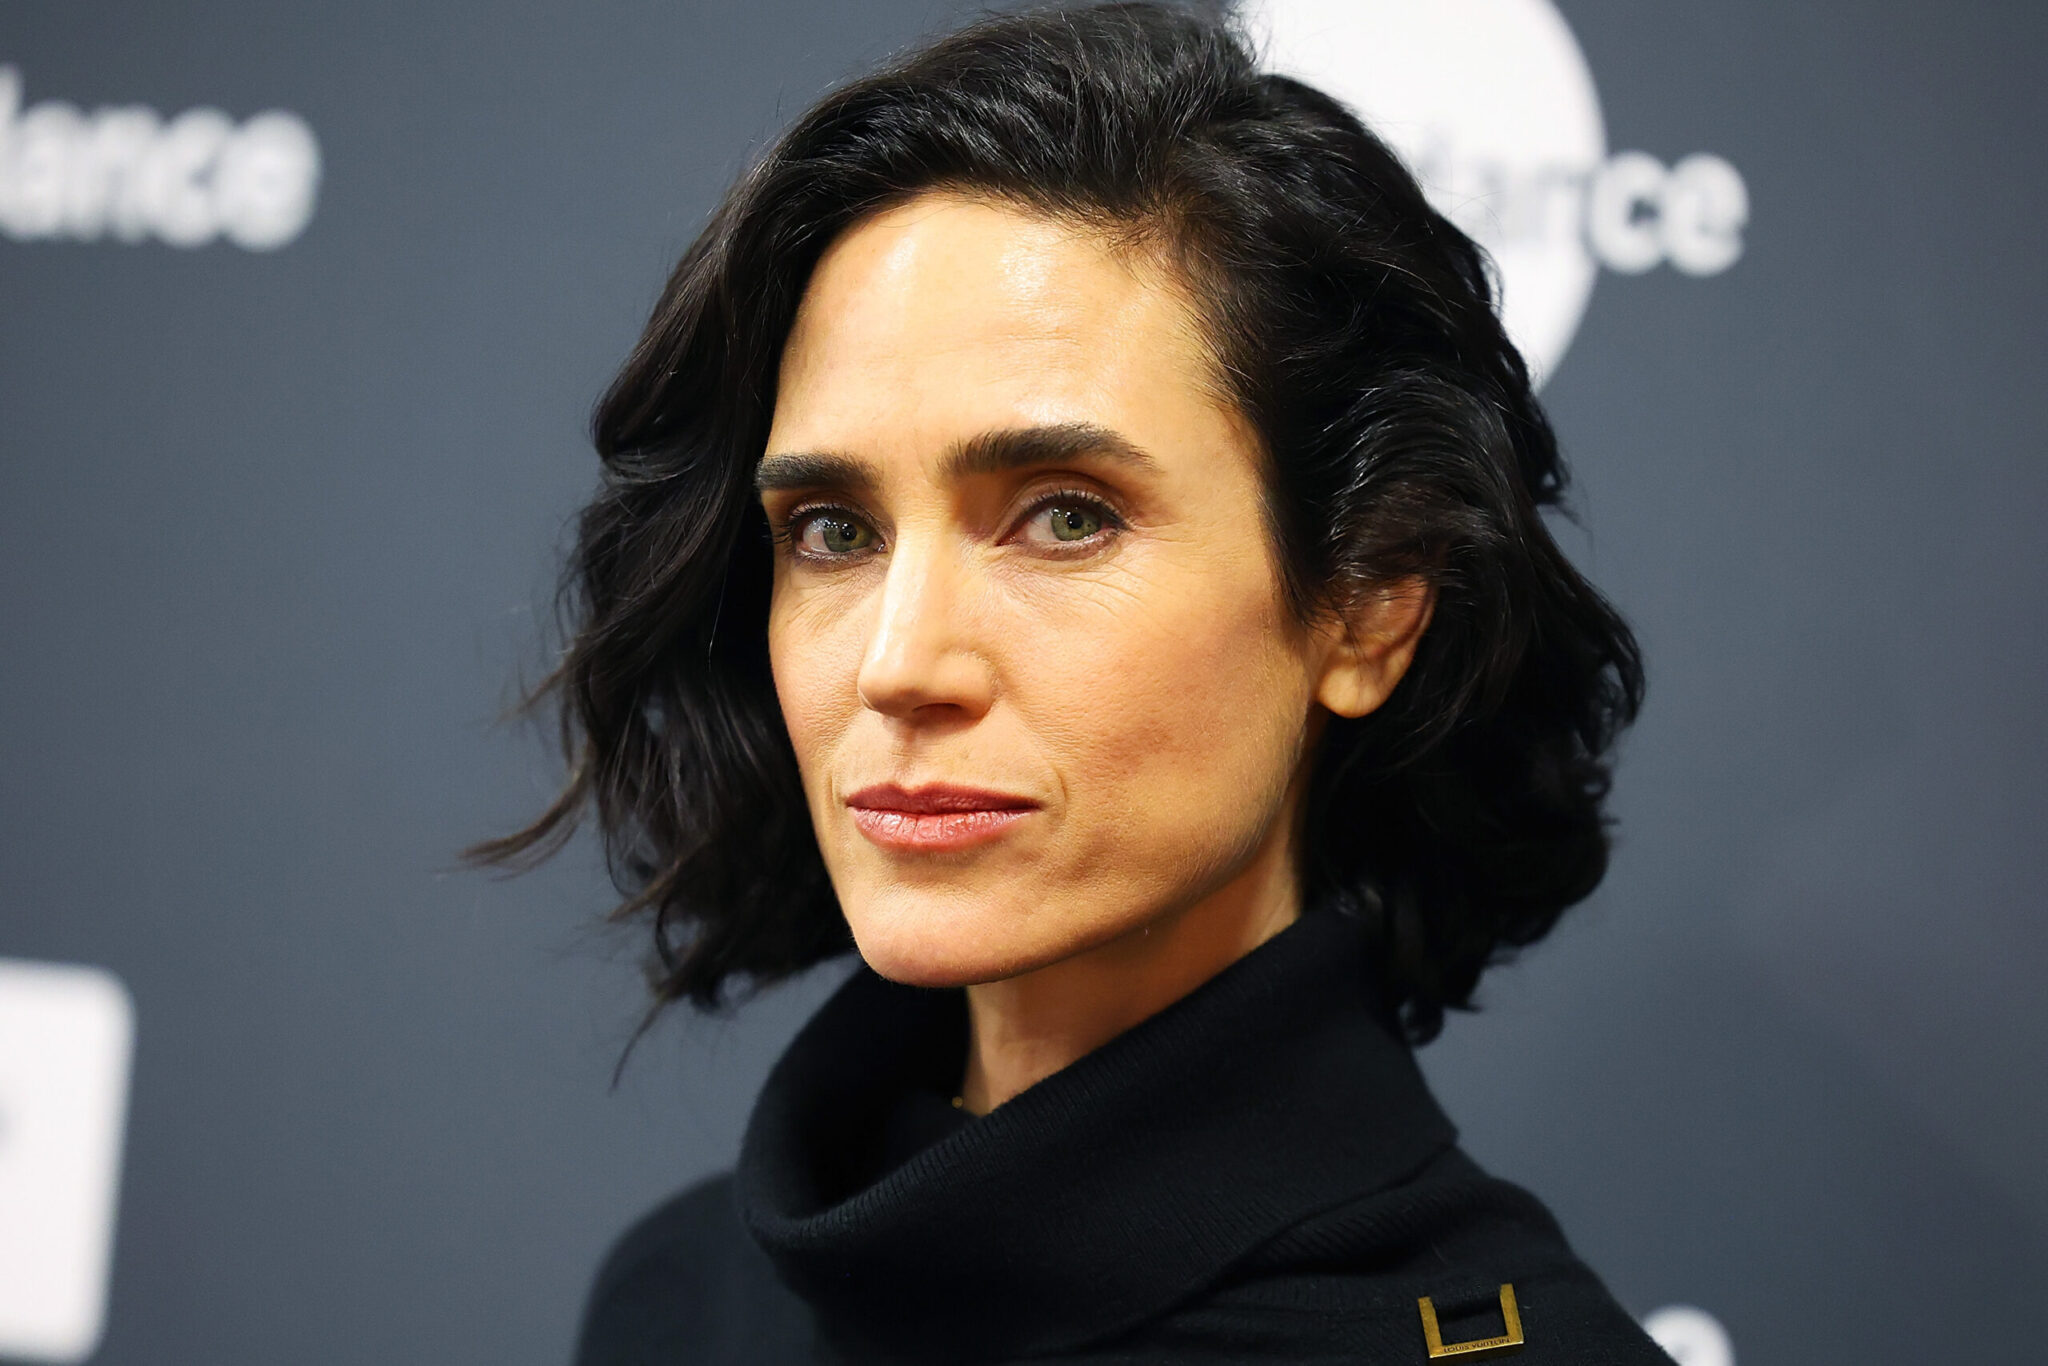 A woman with short black hair in a black turtleneck stares into the camera